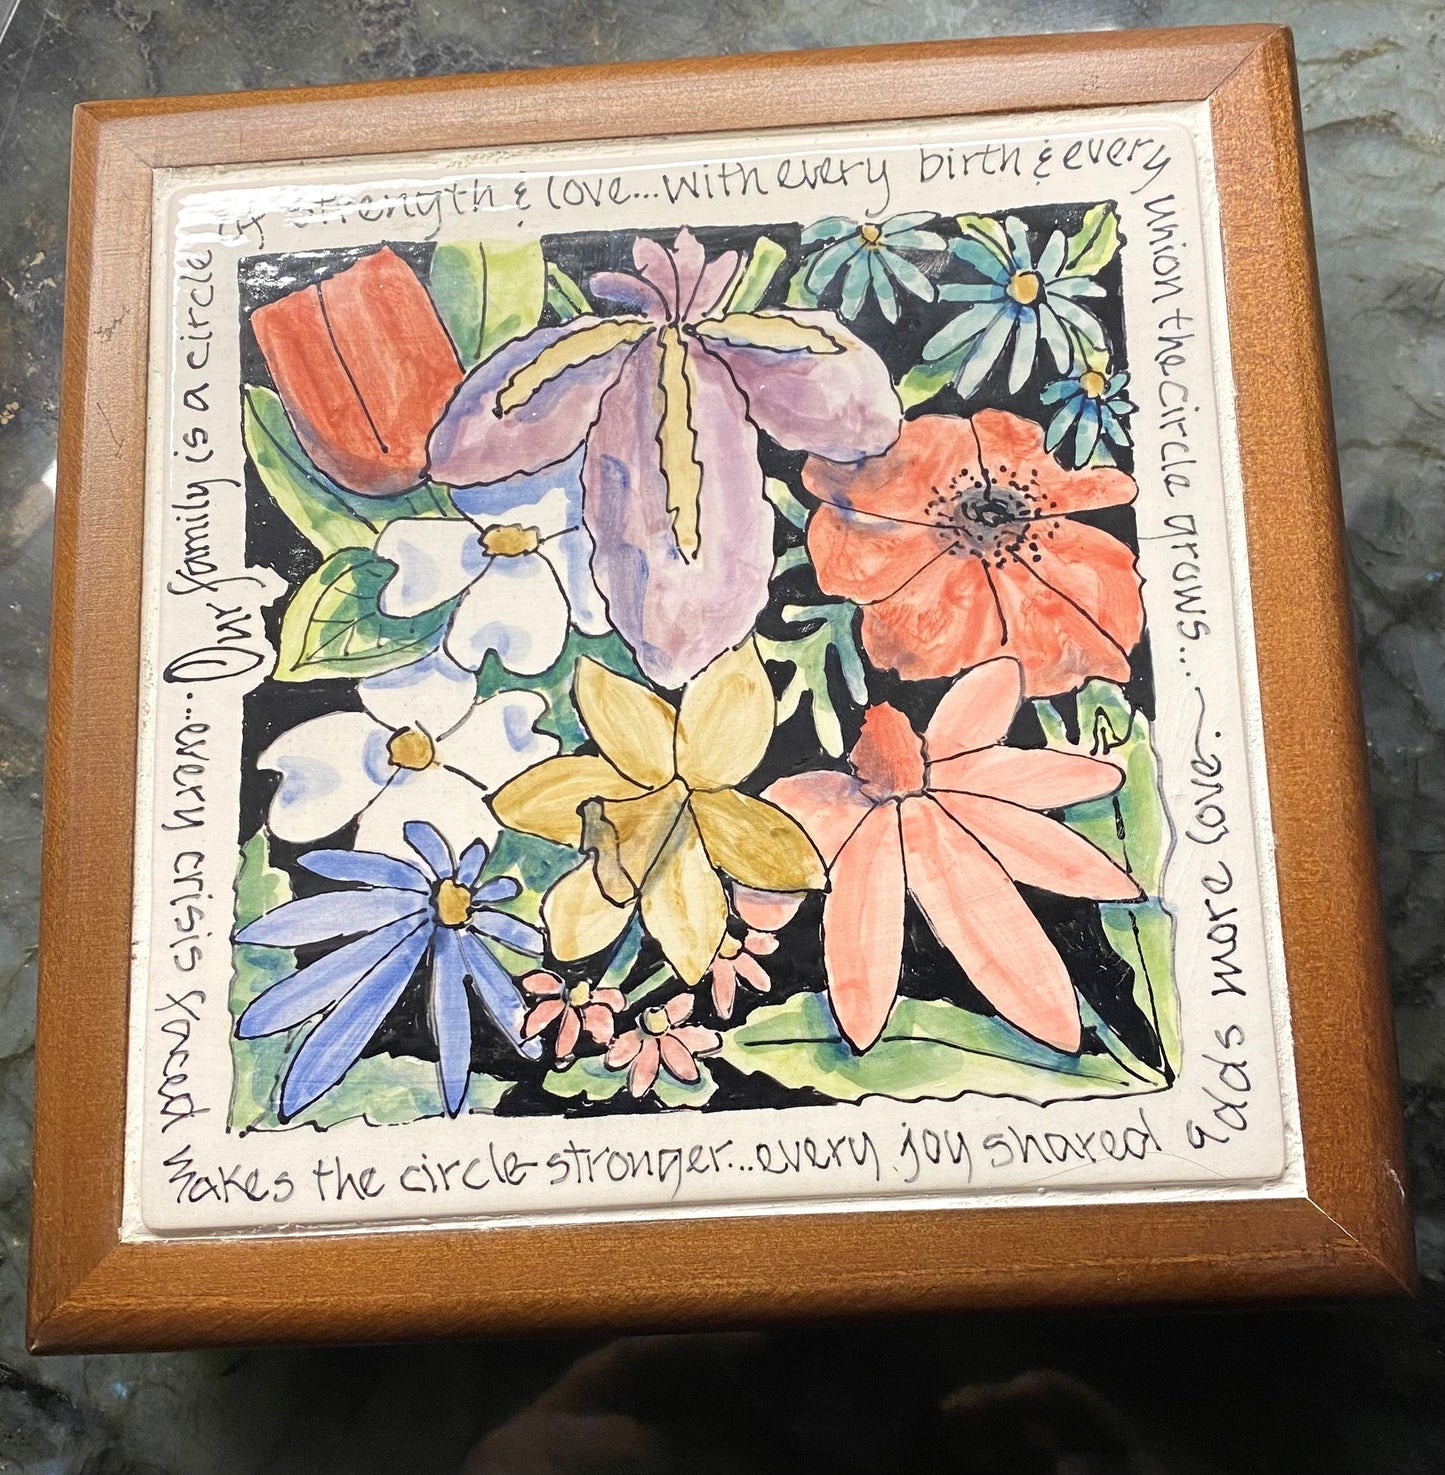 Jan Francoeur Jewelry Box With Hand Painted Tile🎨 Jan's Celebration Pottery🎨 Buy Art at Carolina Creations Gallery in Downtown New Bern🎨